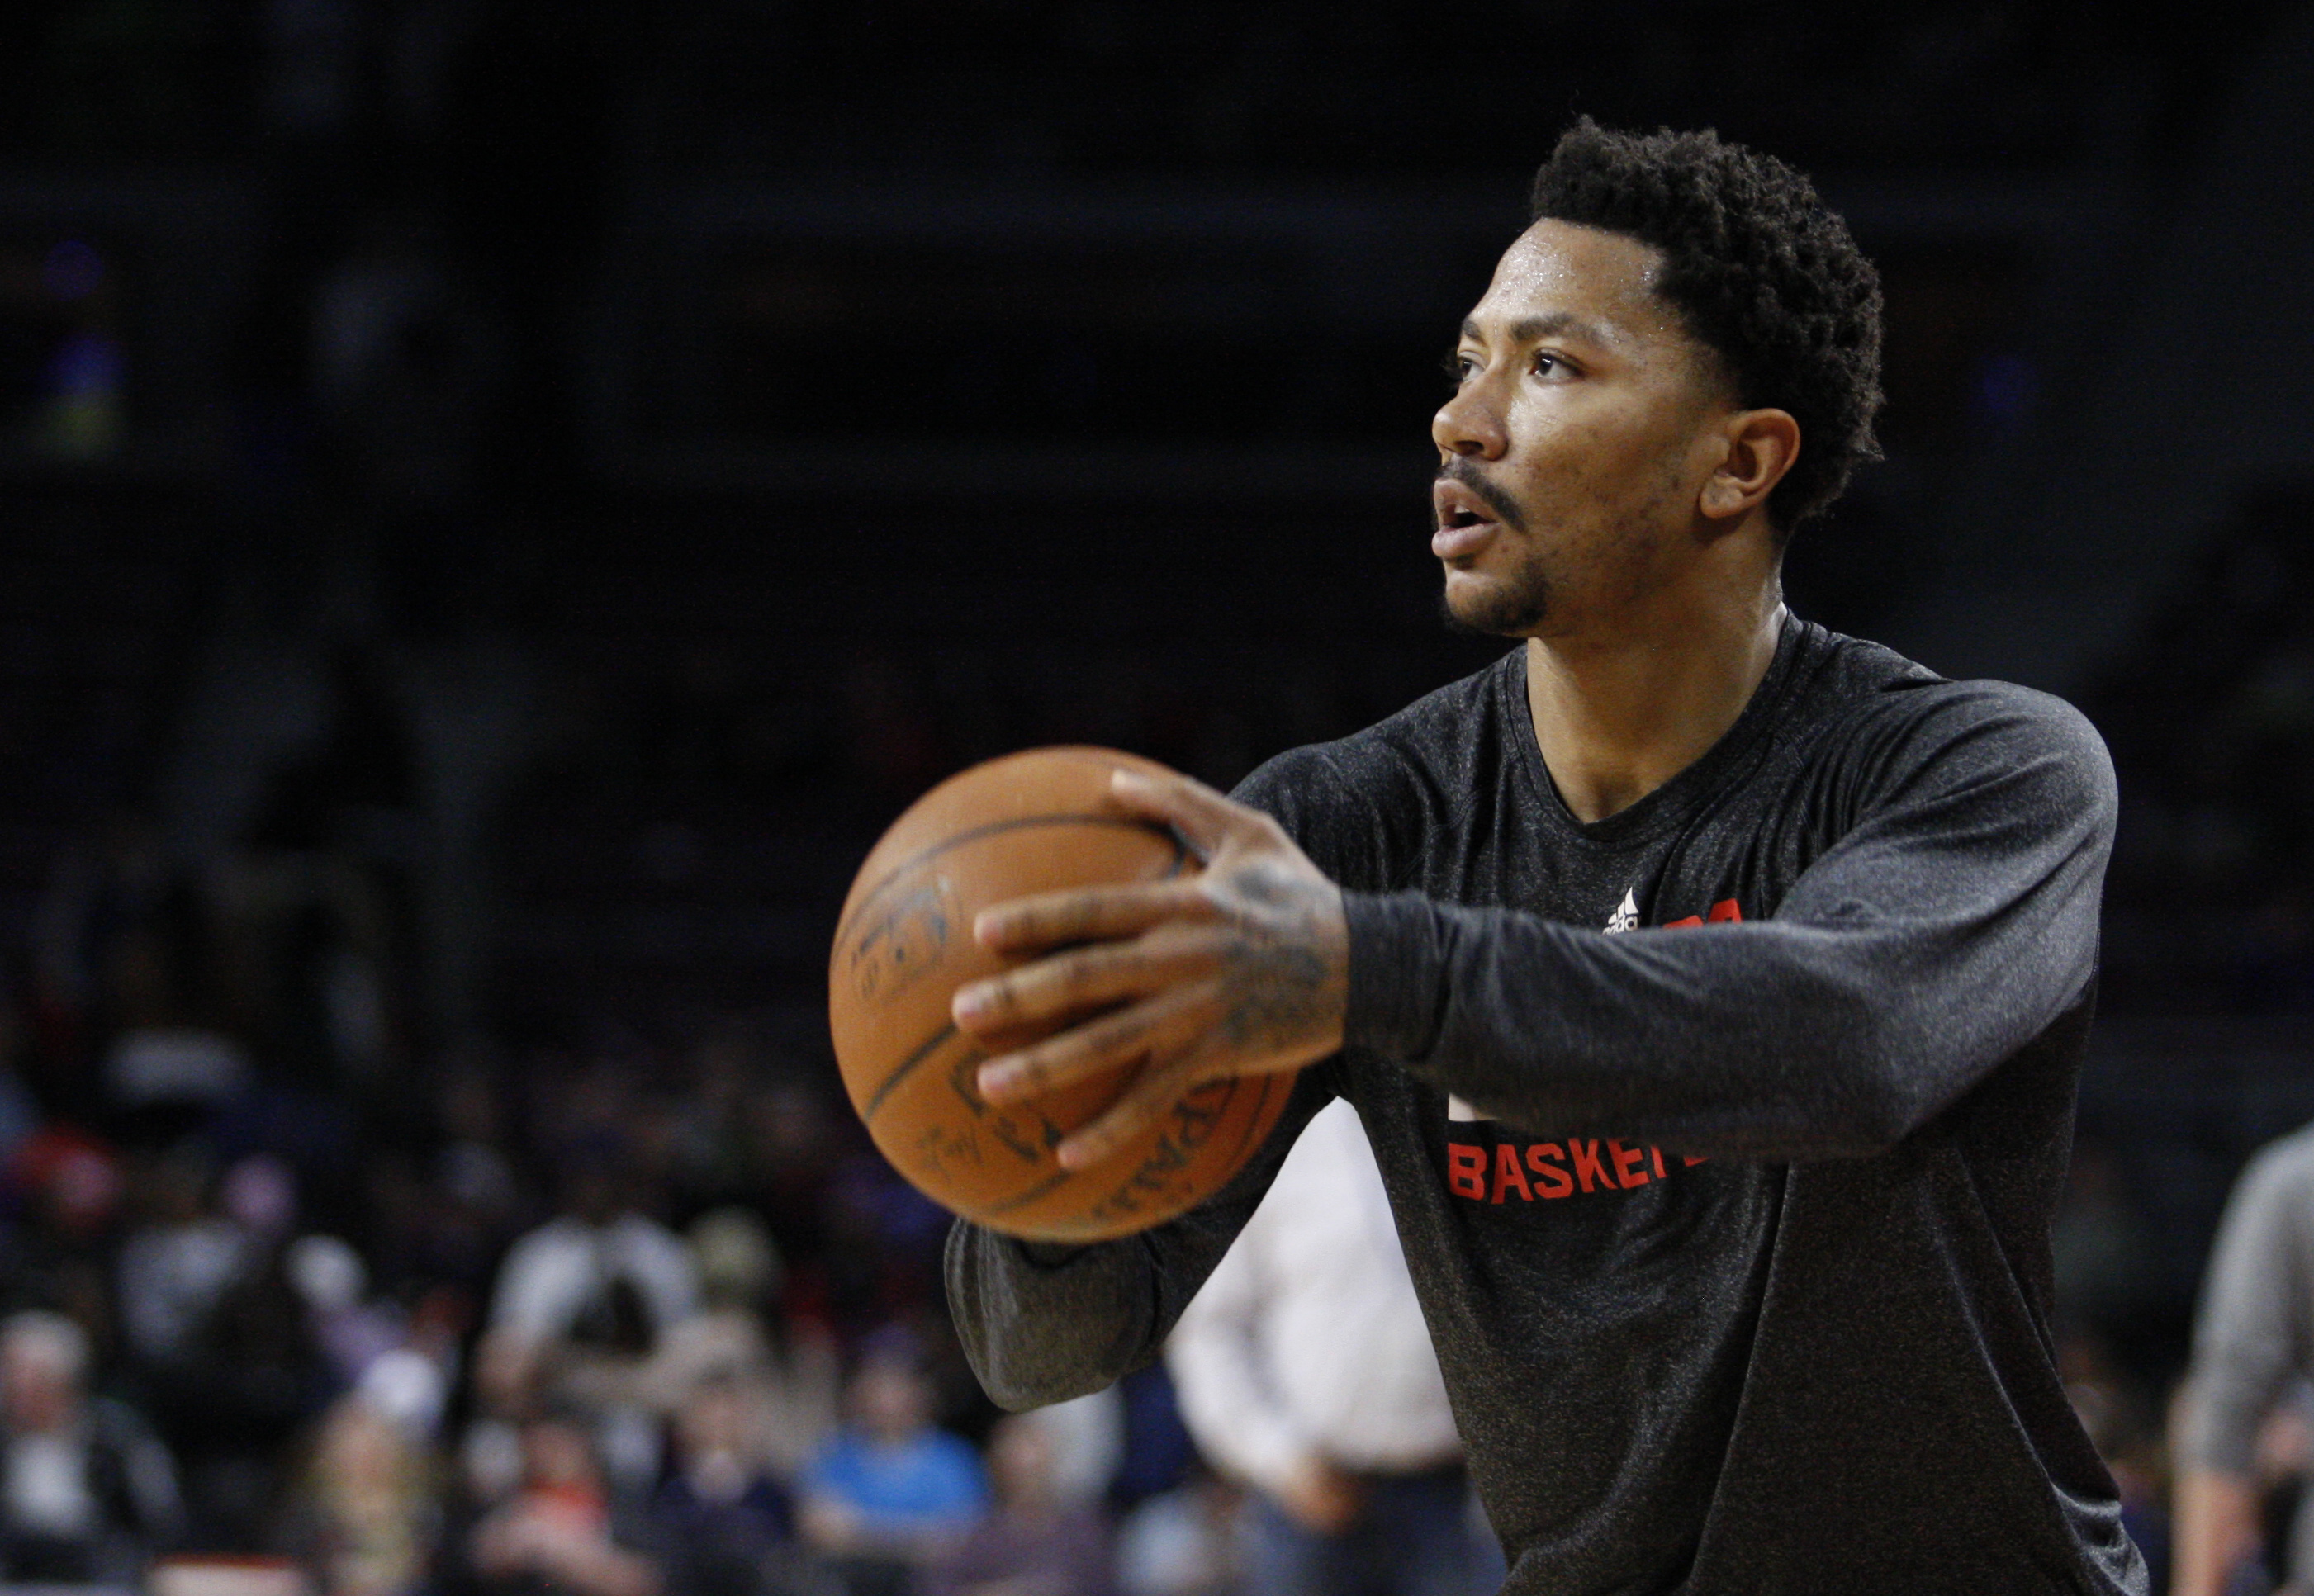 Chicago Bulls guard Derrick Rose warms up before the game against the Detroit Pistons at The Palace of Auburn Hills. (Raj Mehta-USA TODAY Sports)